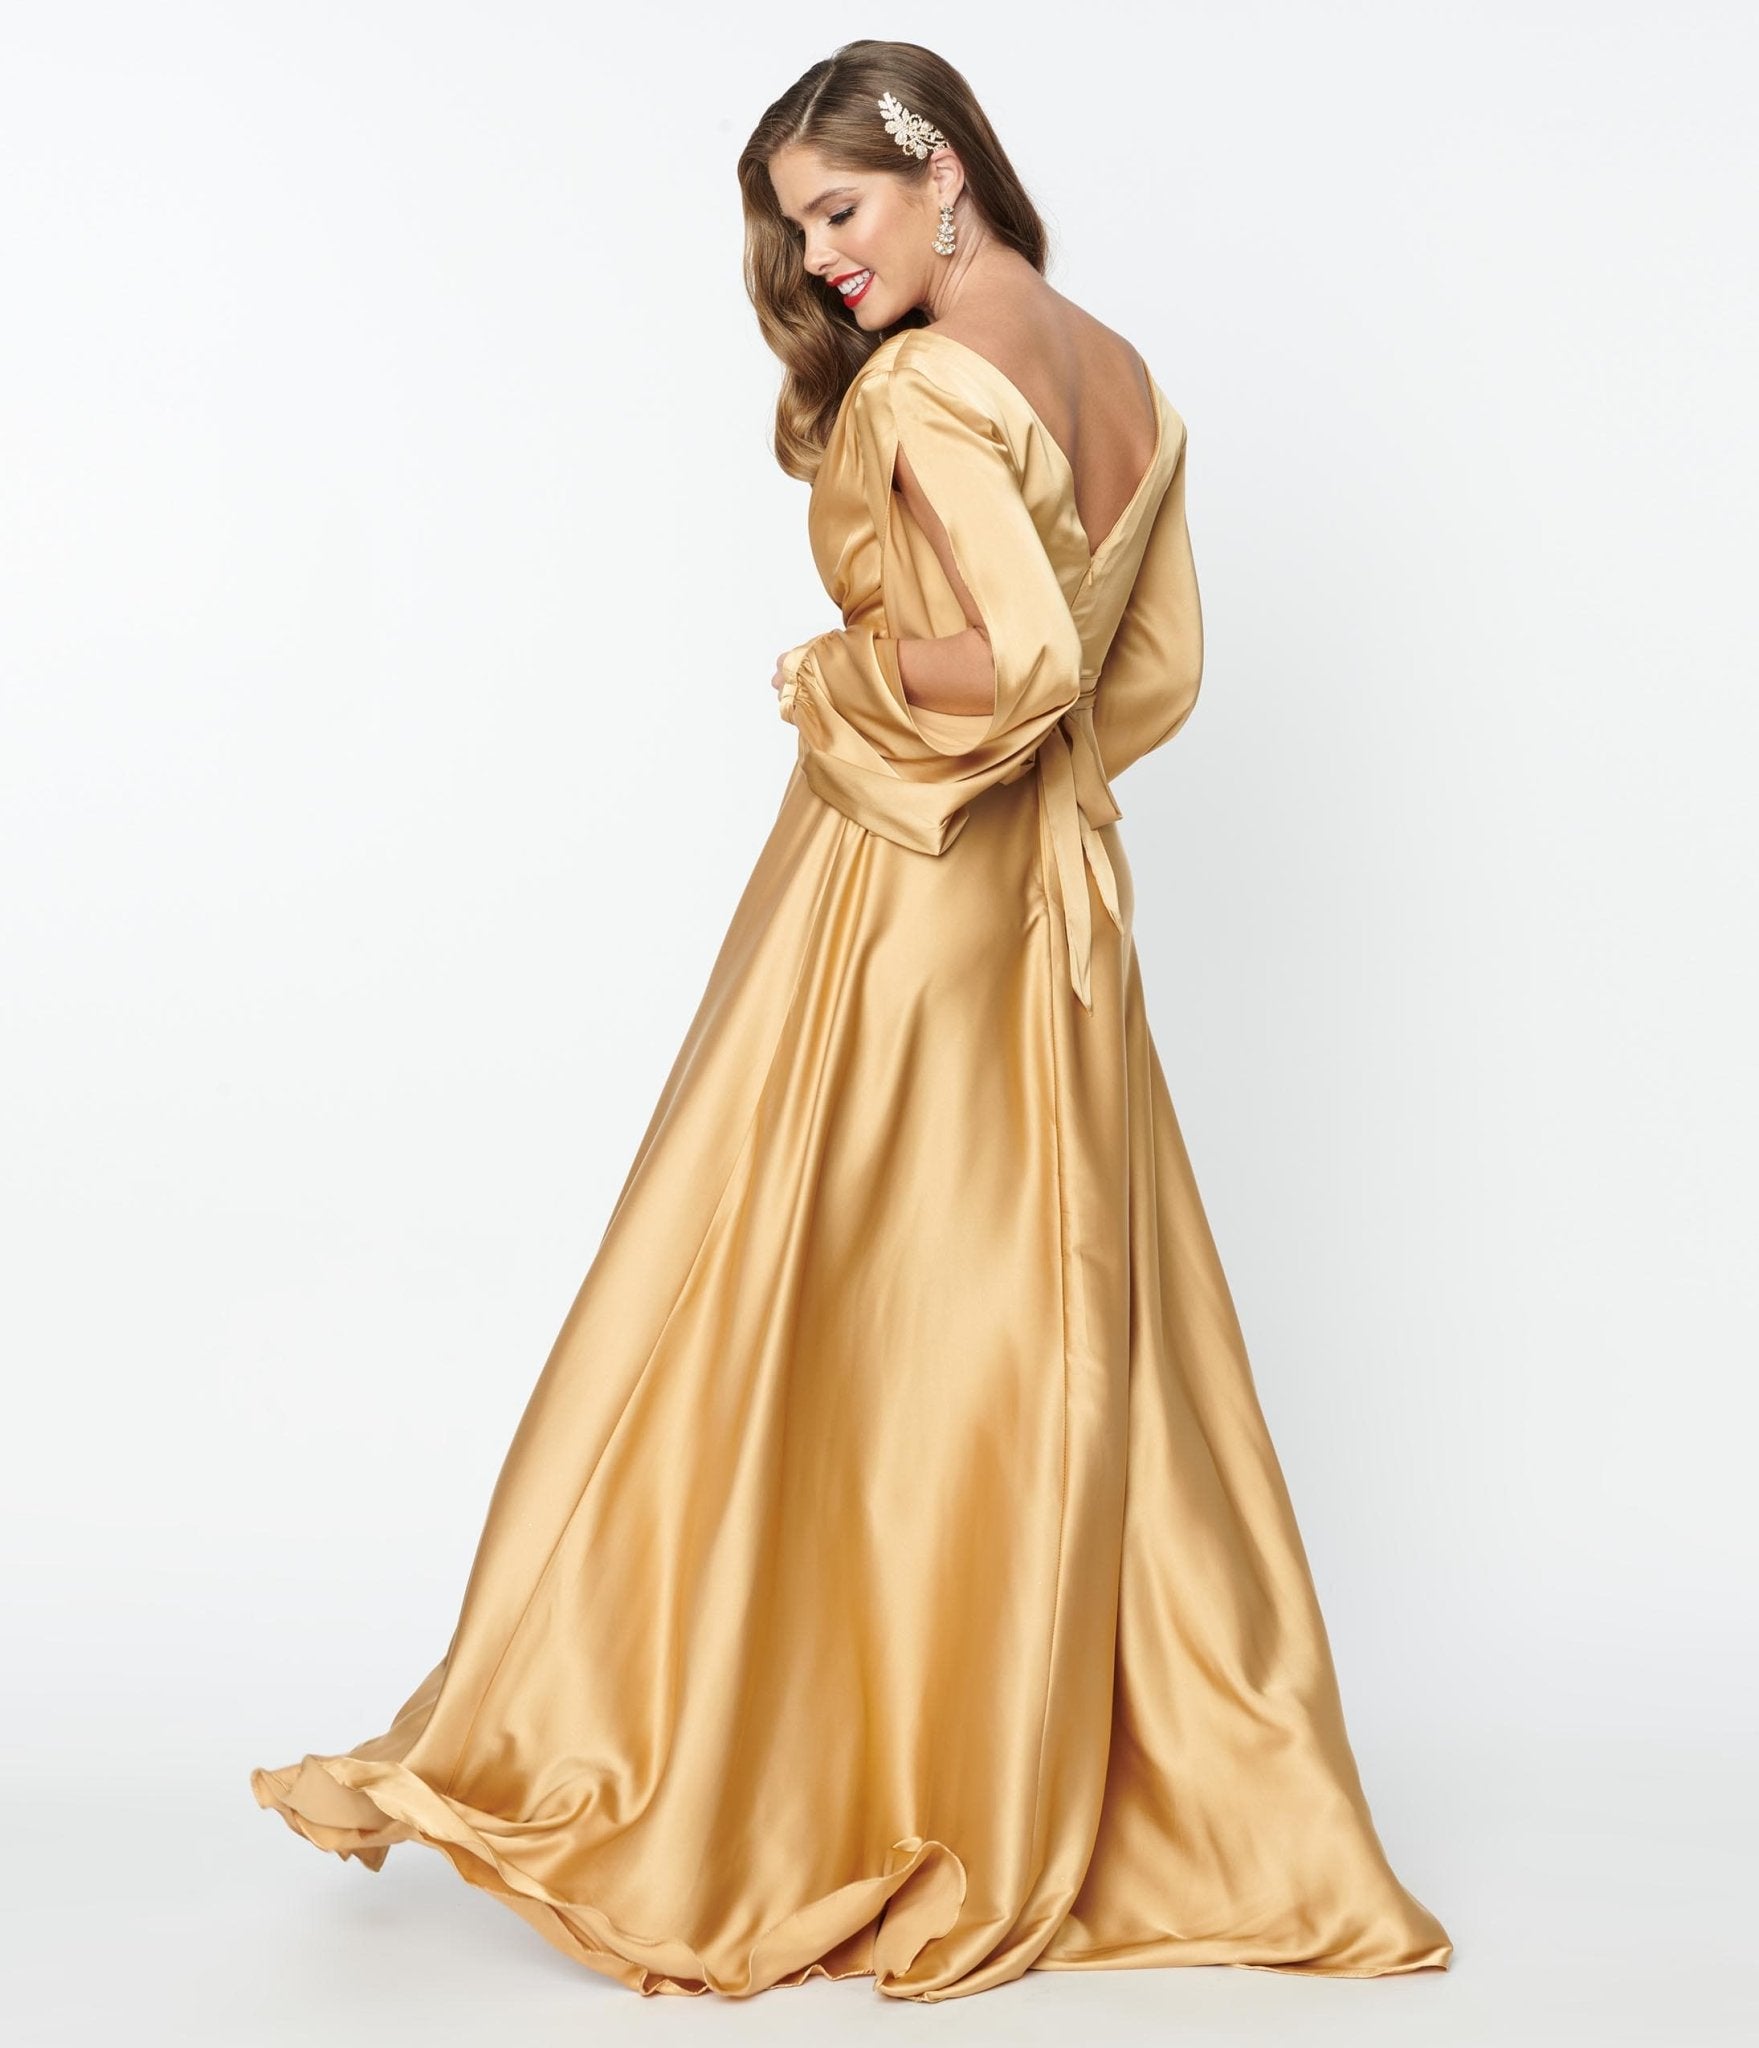 Buy Women Satin Night Gown Online In India At Discounted Prices